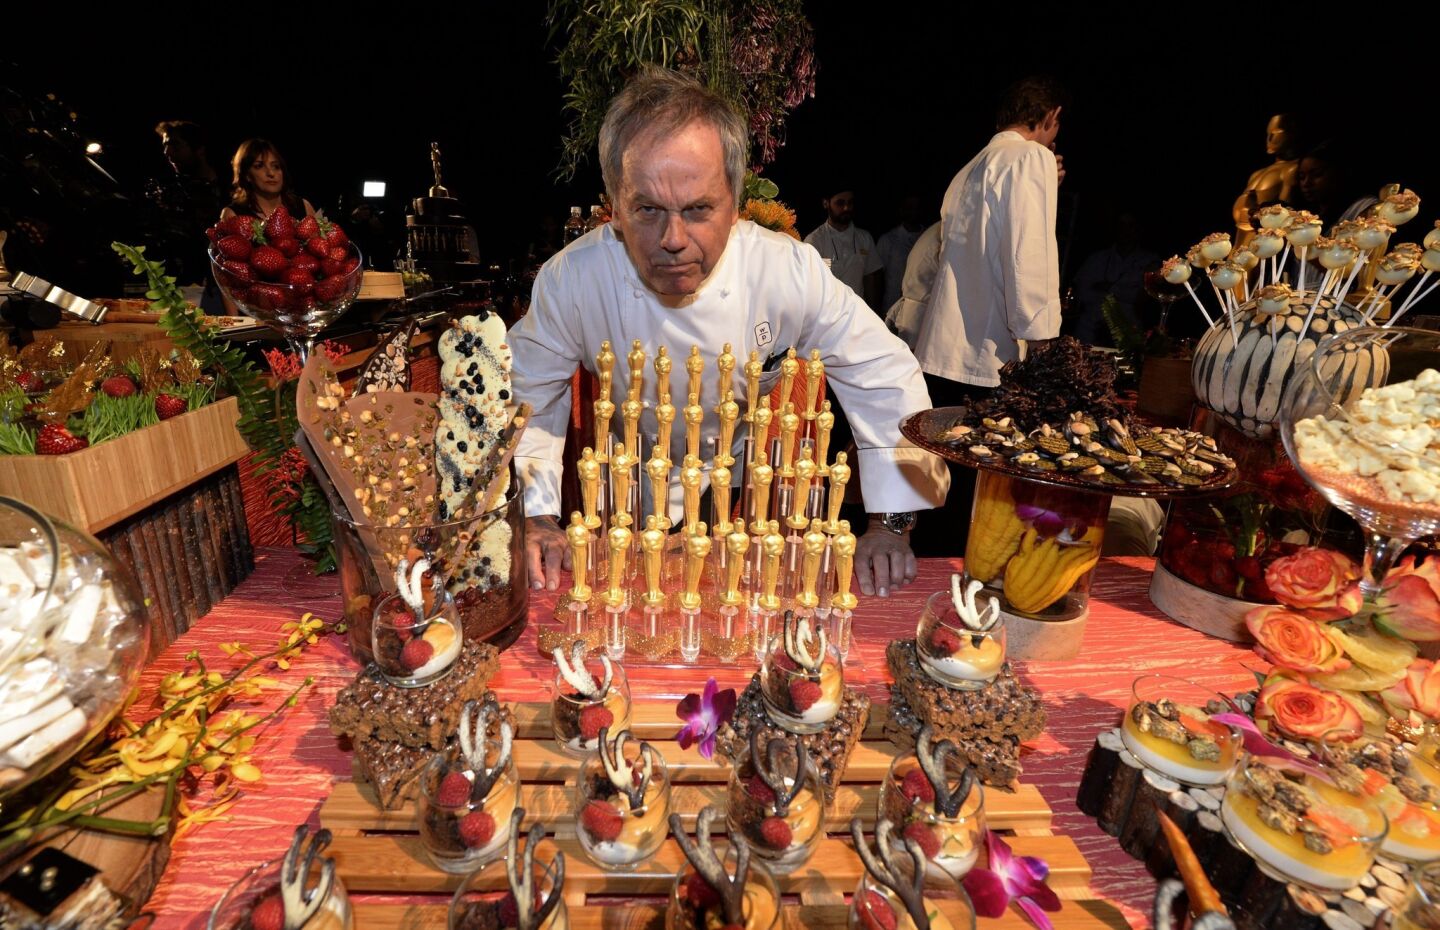 Wolfgang Puck poses with chocolate Oscar statuettes and a table of desserts destined for the Oscars Governors Ball.